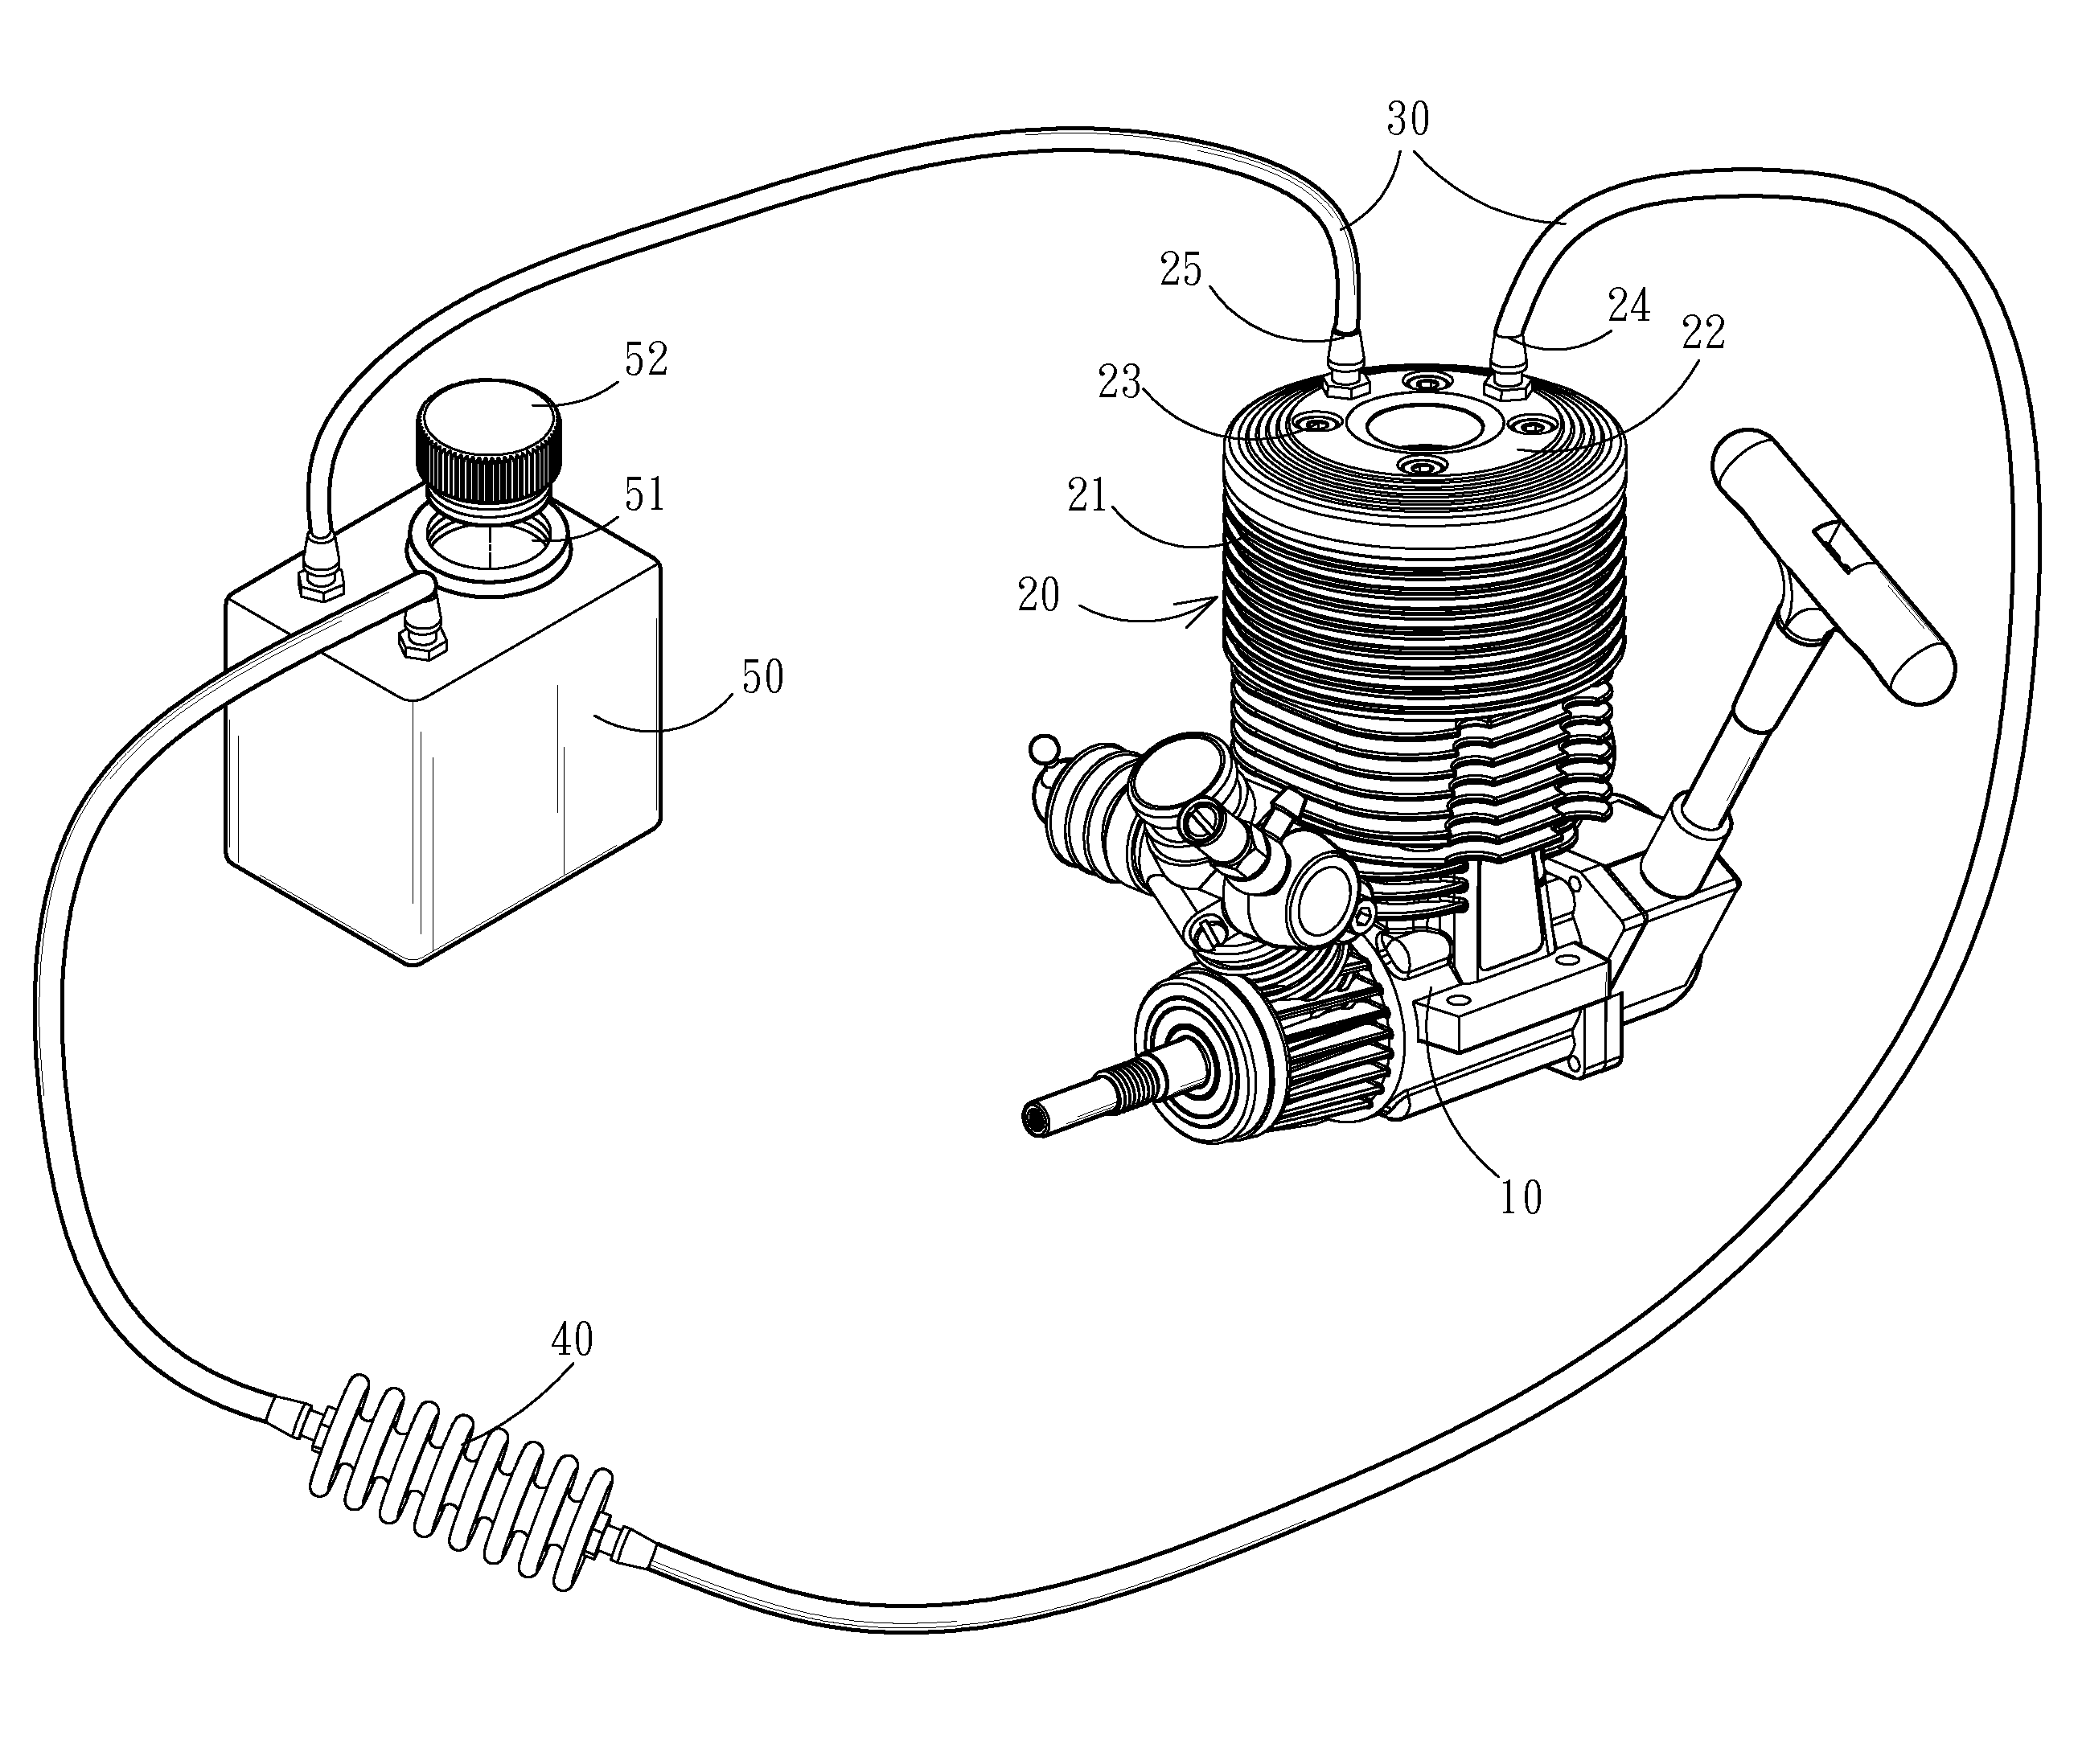 Water cooling device for model toy engine